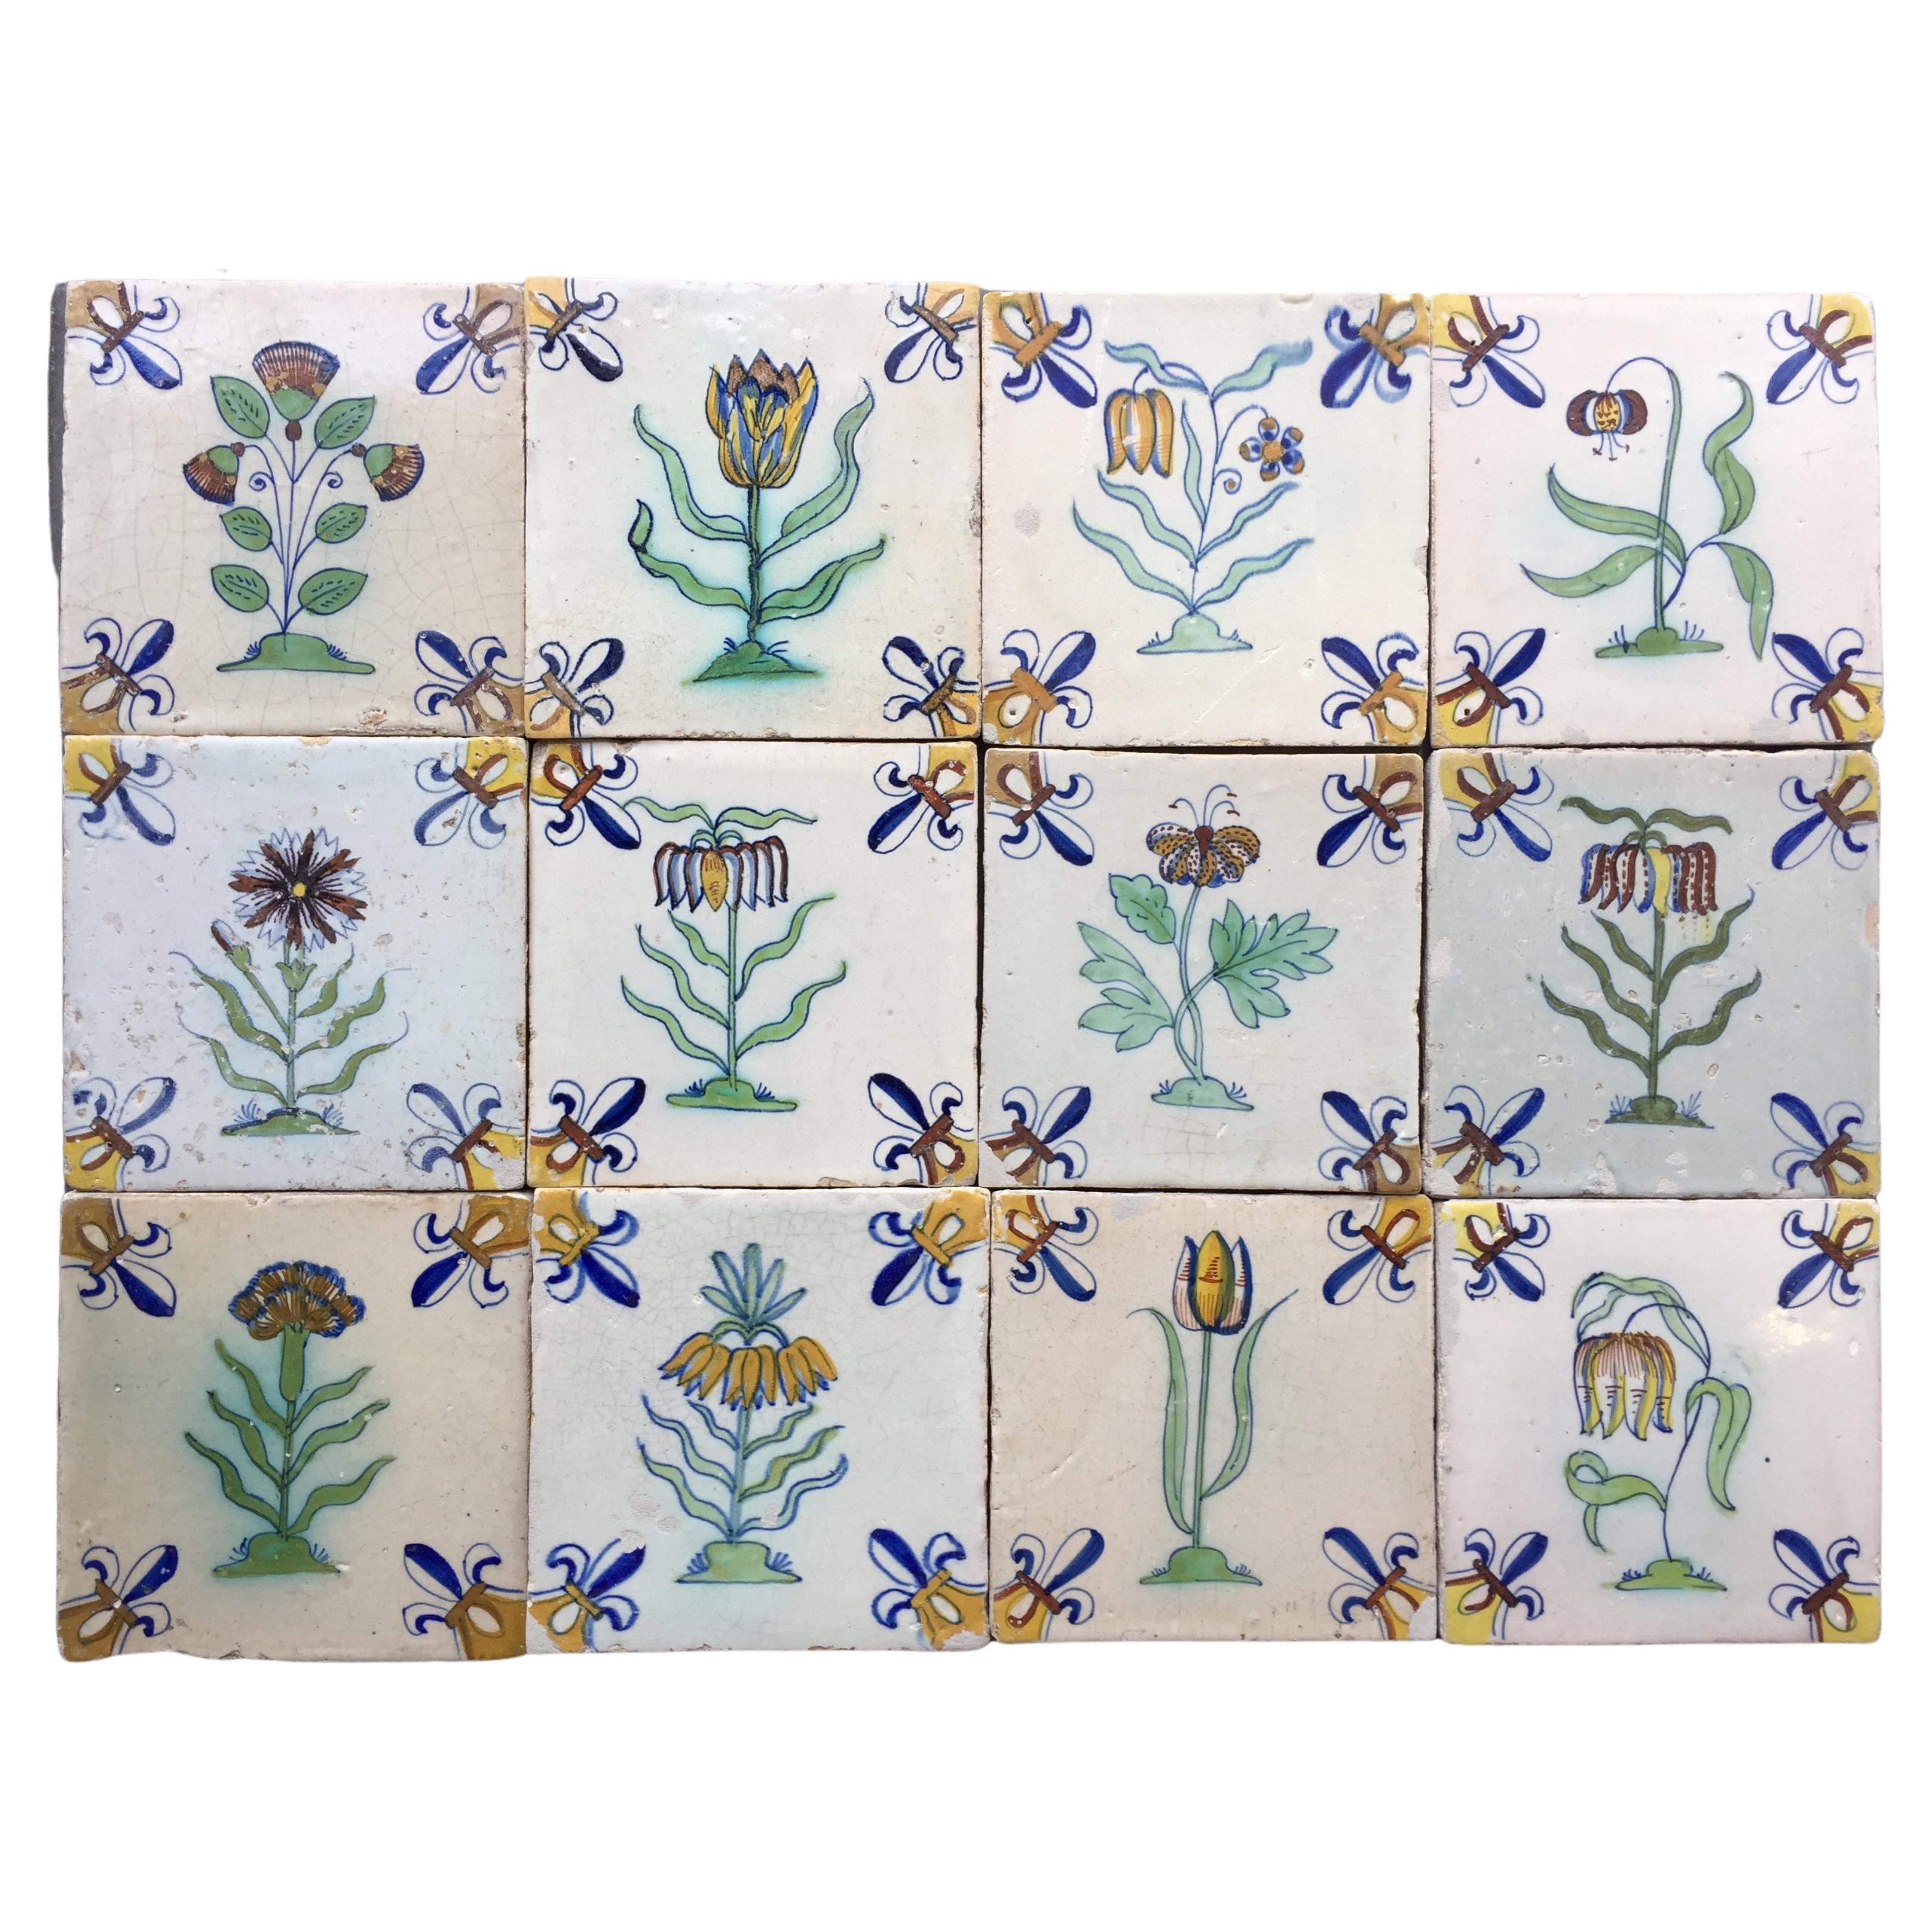 A set of 12 polychrome Dutch Delft tiles with flowers